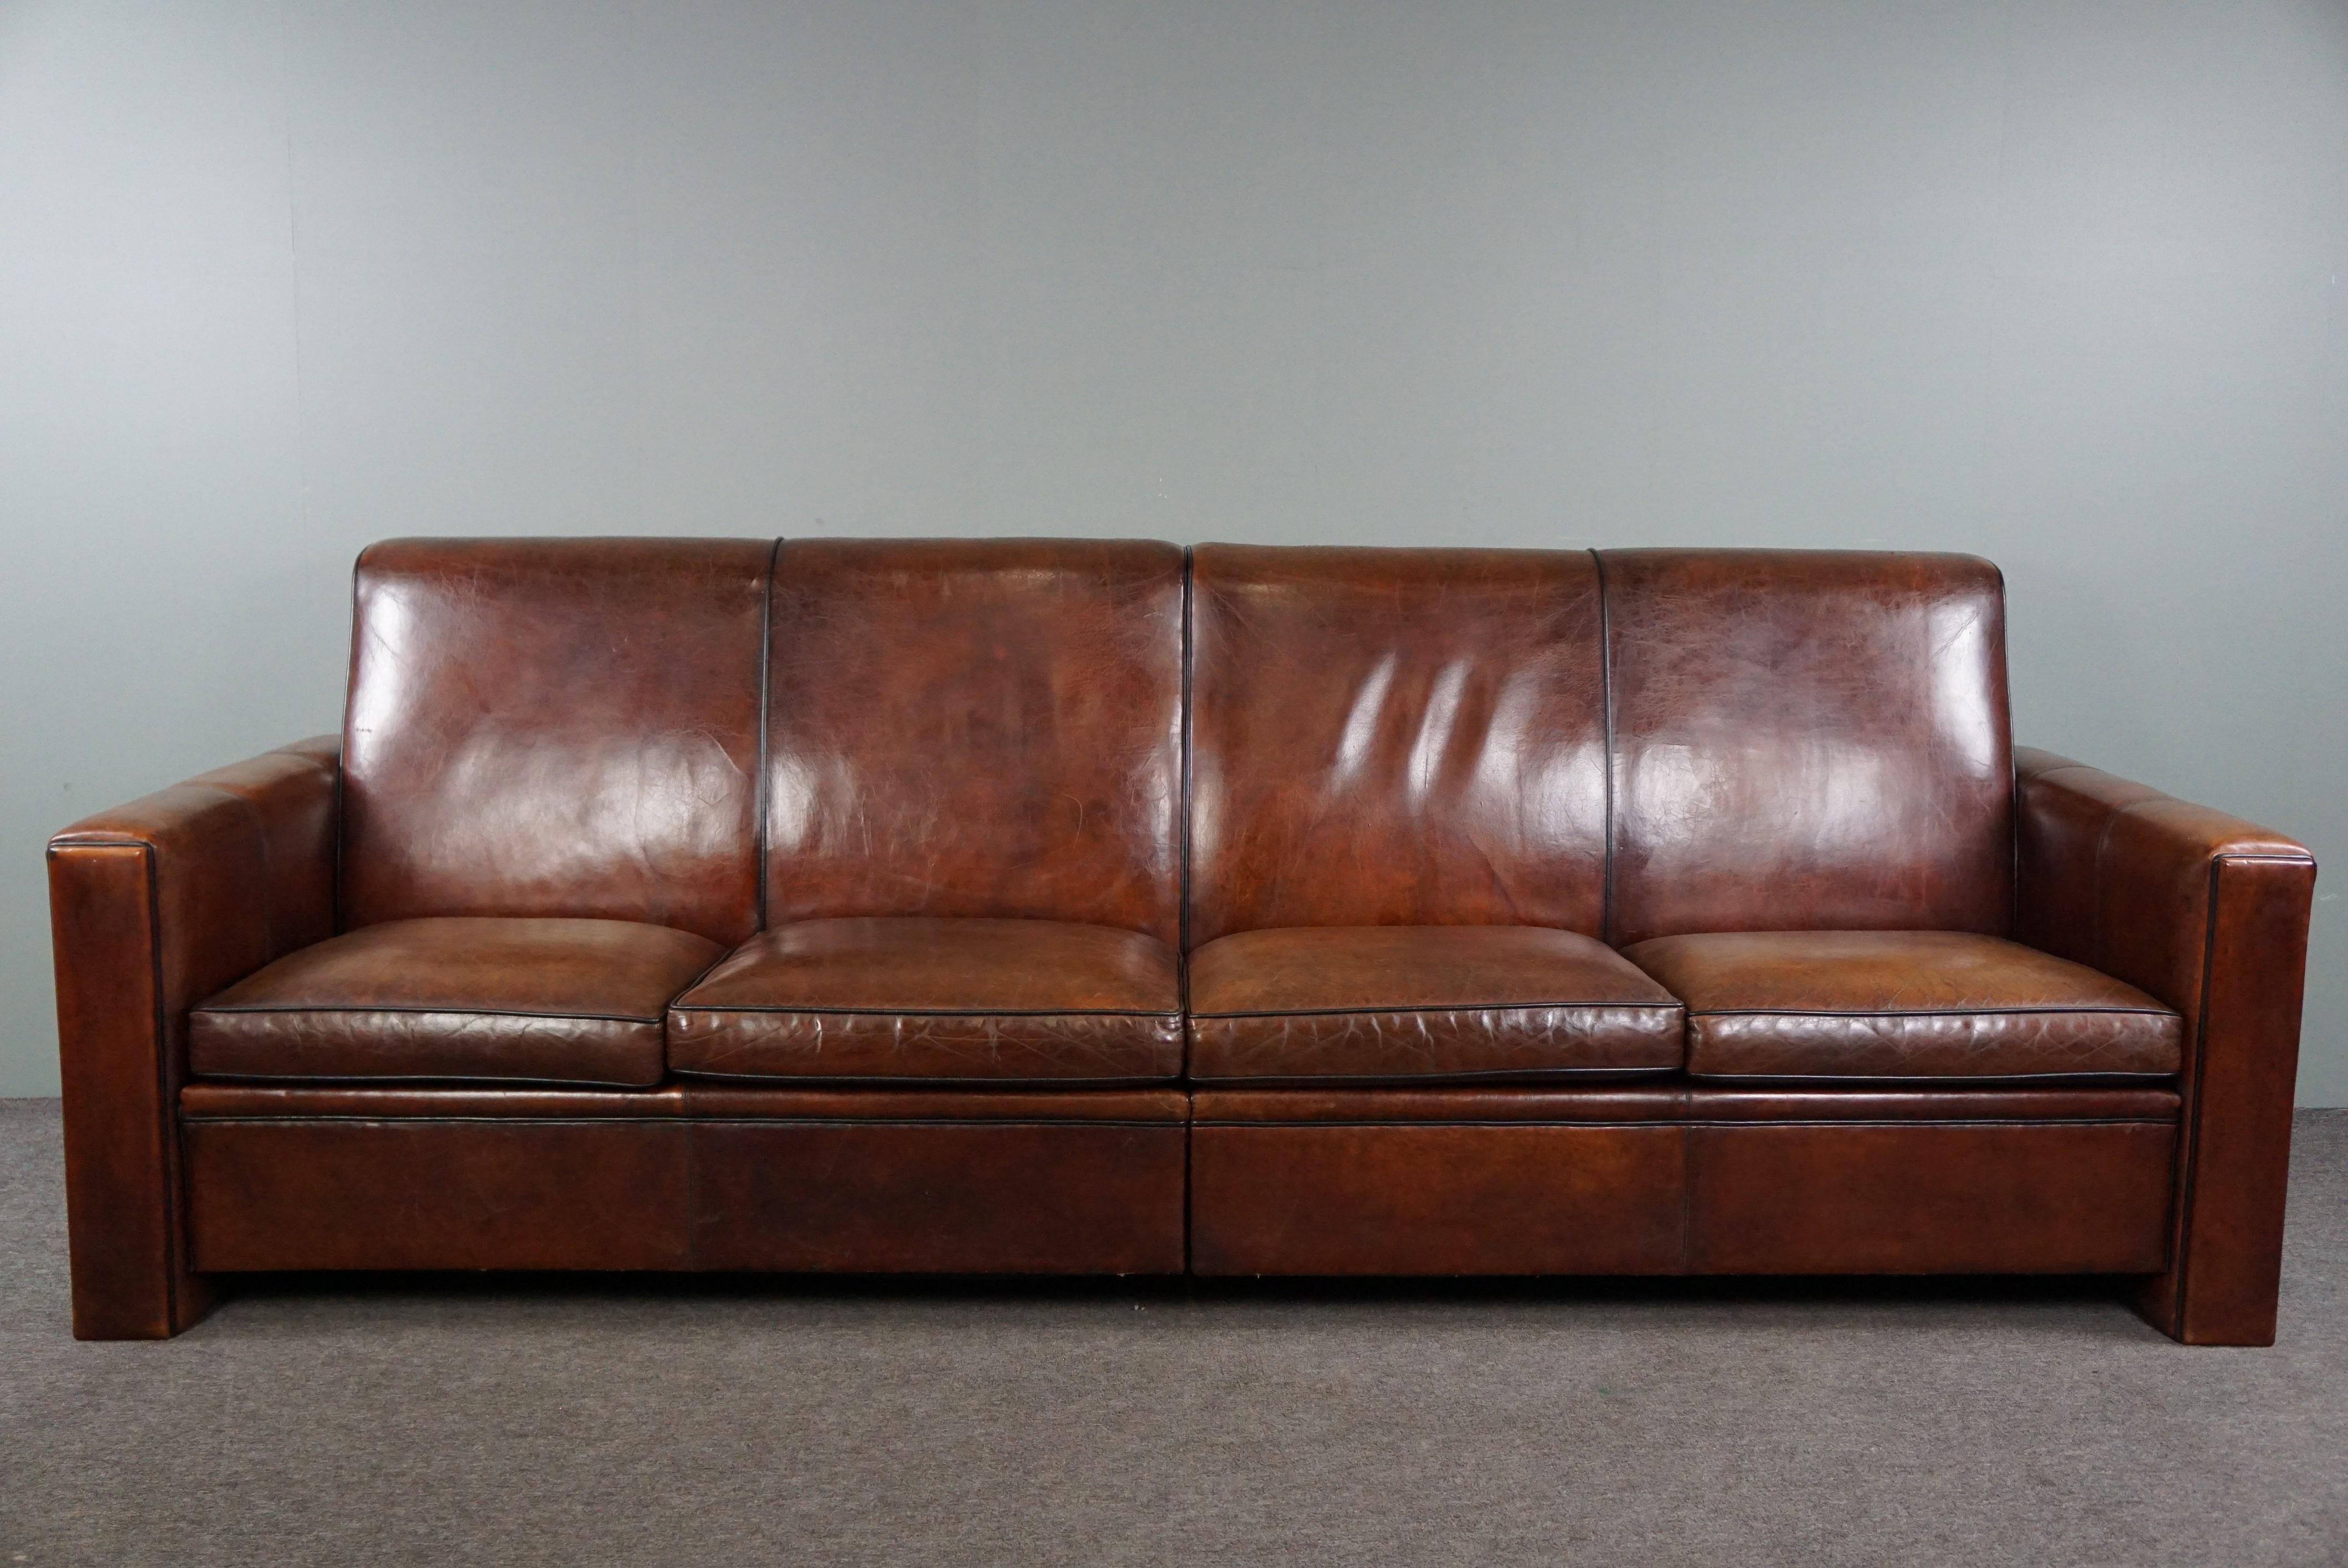 Offered is this large custom-made sheepskin leather 4-seater design sofa. We don't come across sheepskin leather sofas of this size often. That's not surprising since it was custom-made and not readily available in this size in factories. Its life